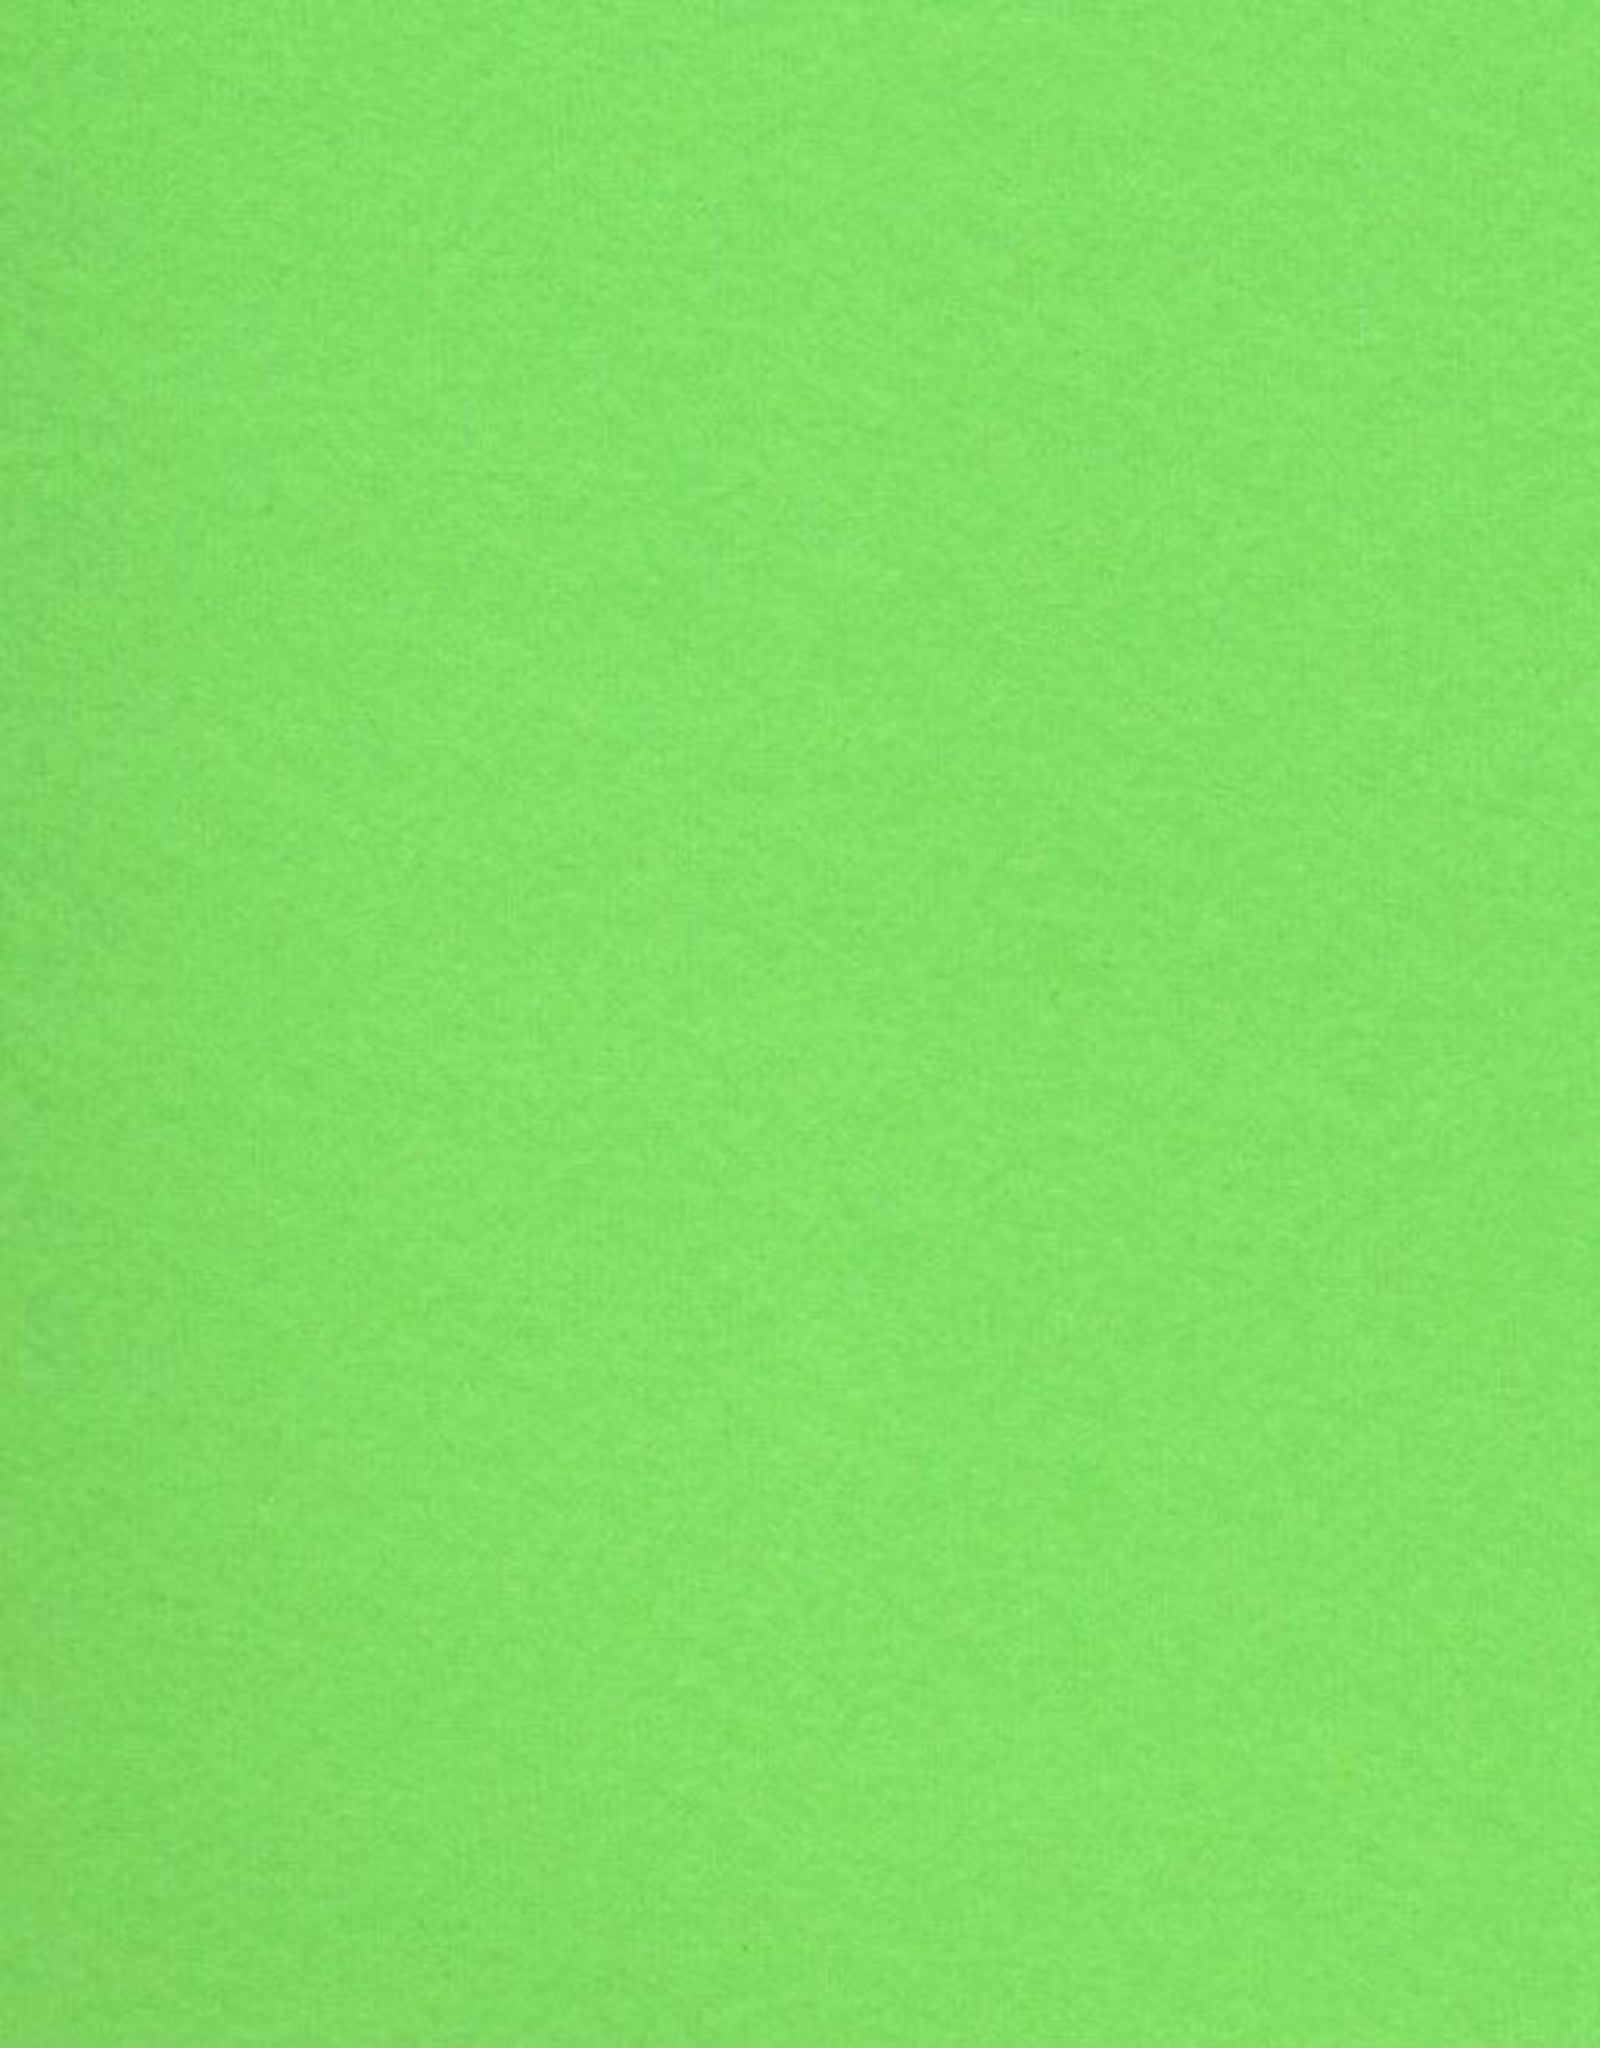 Fabriano Elle Erre Sketchbook, size 21 * 29.7 cm, 20 sheets, Green